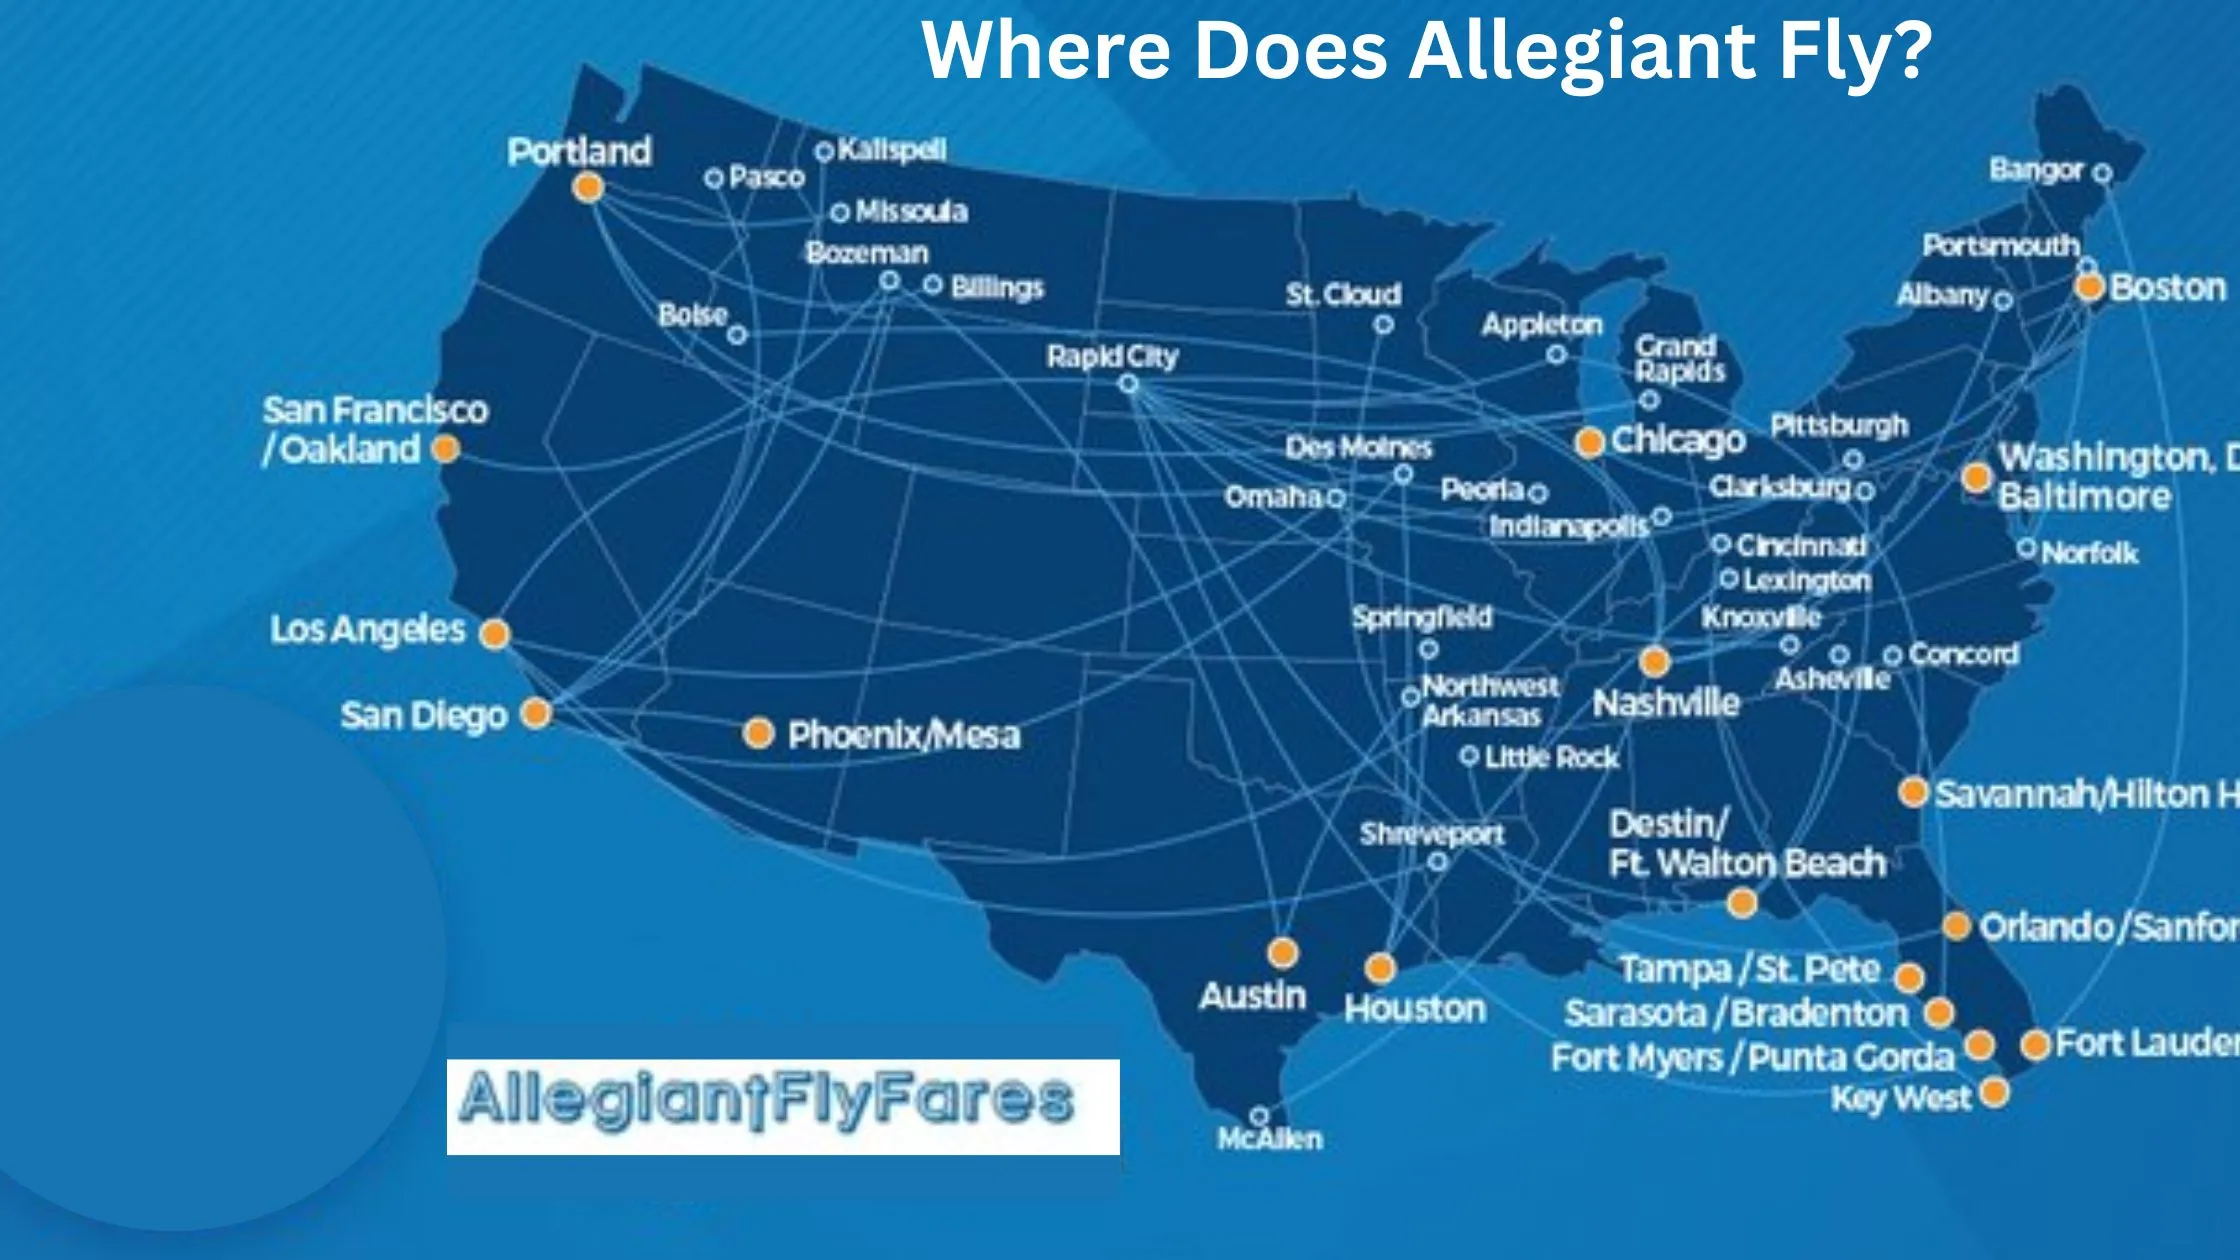 Where Does Allegiant Fly?